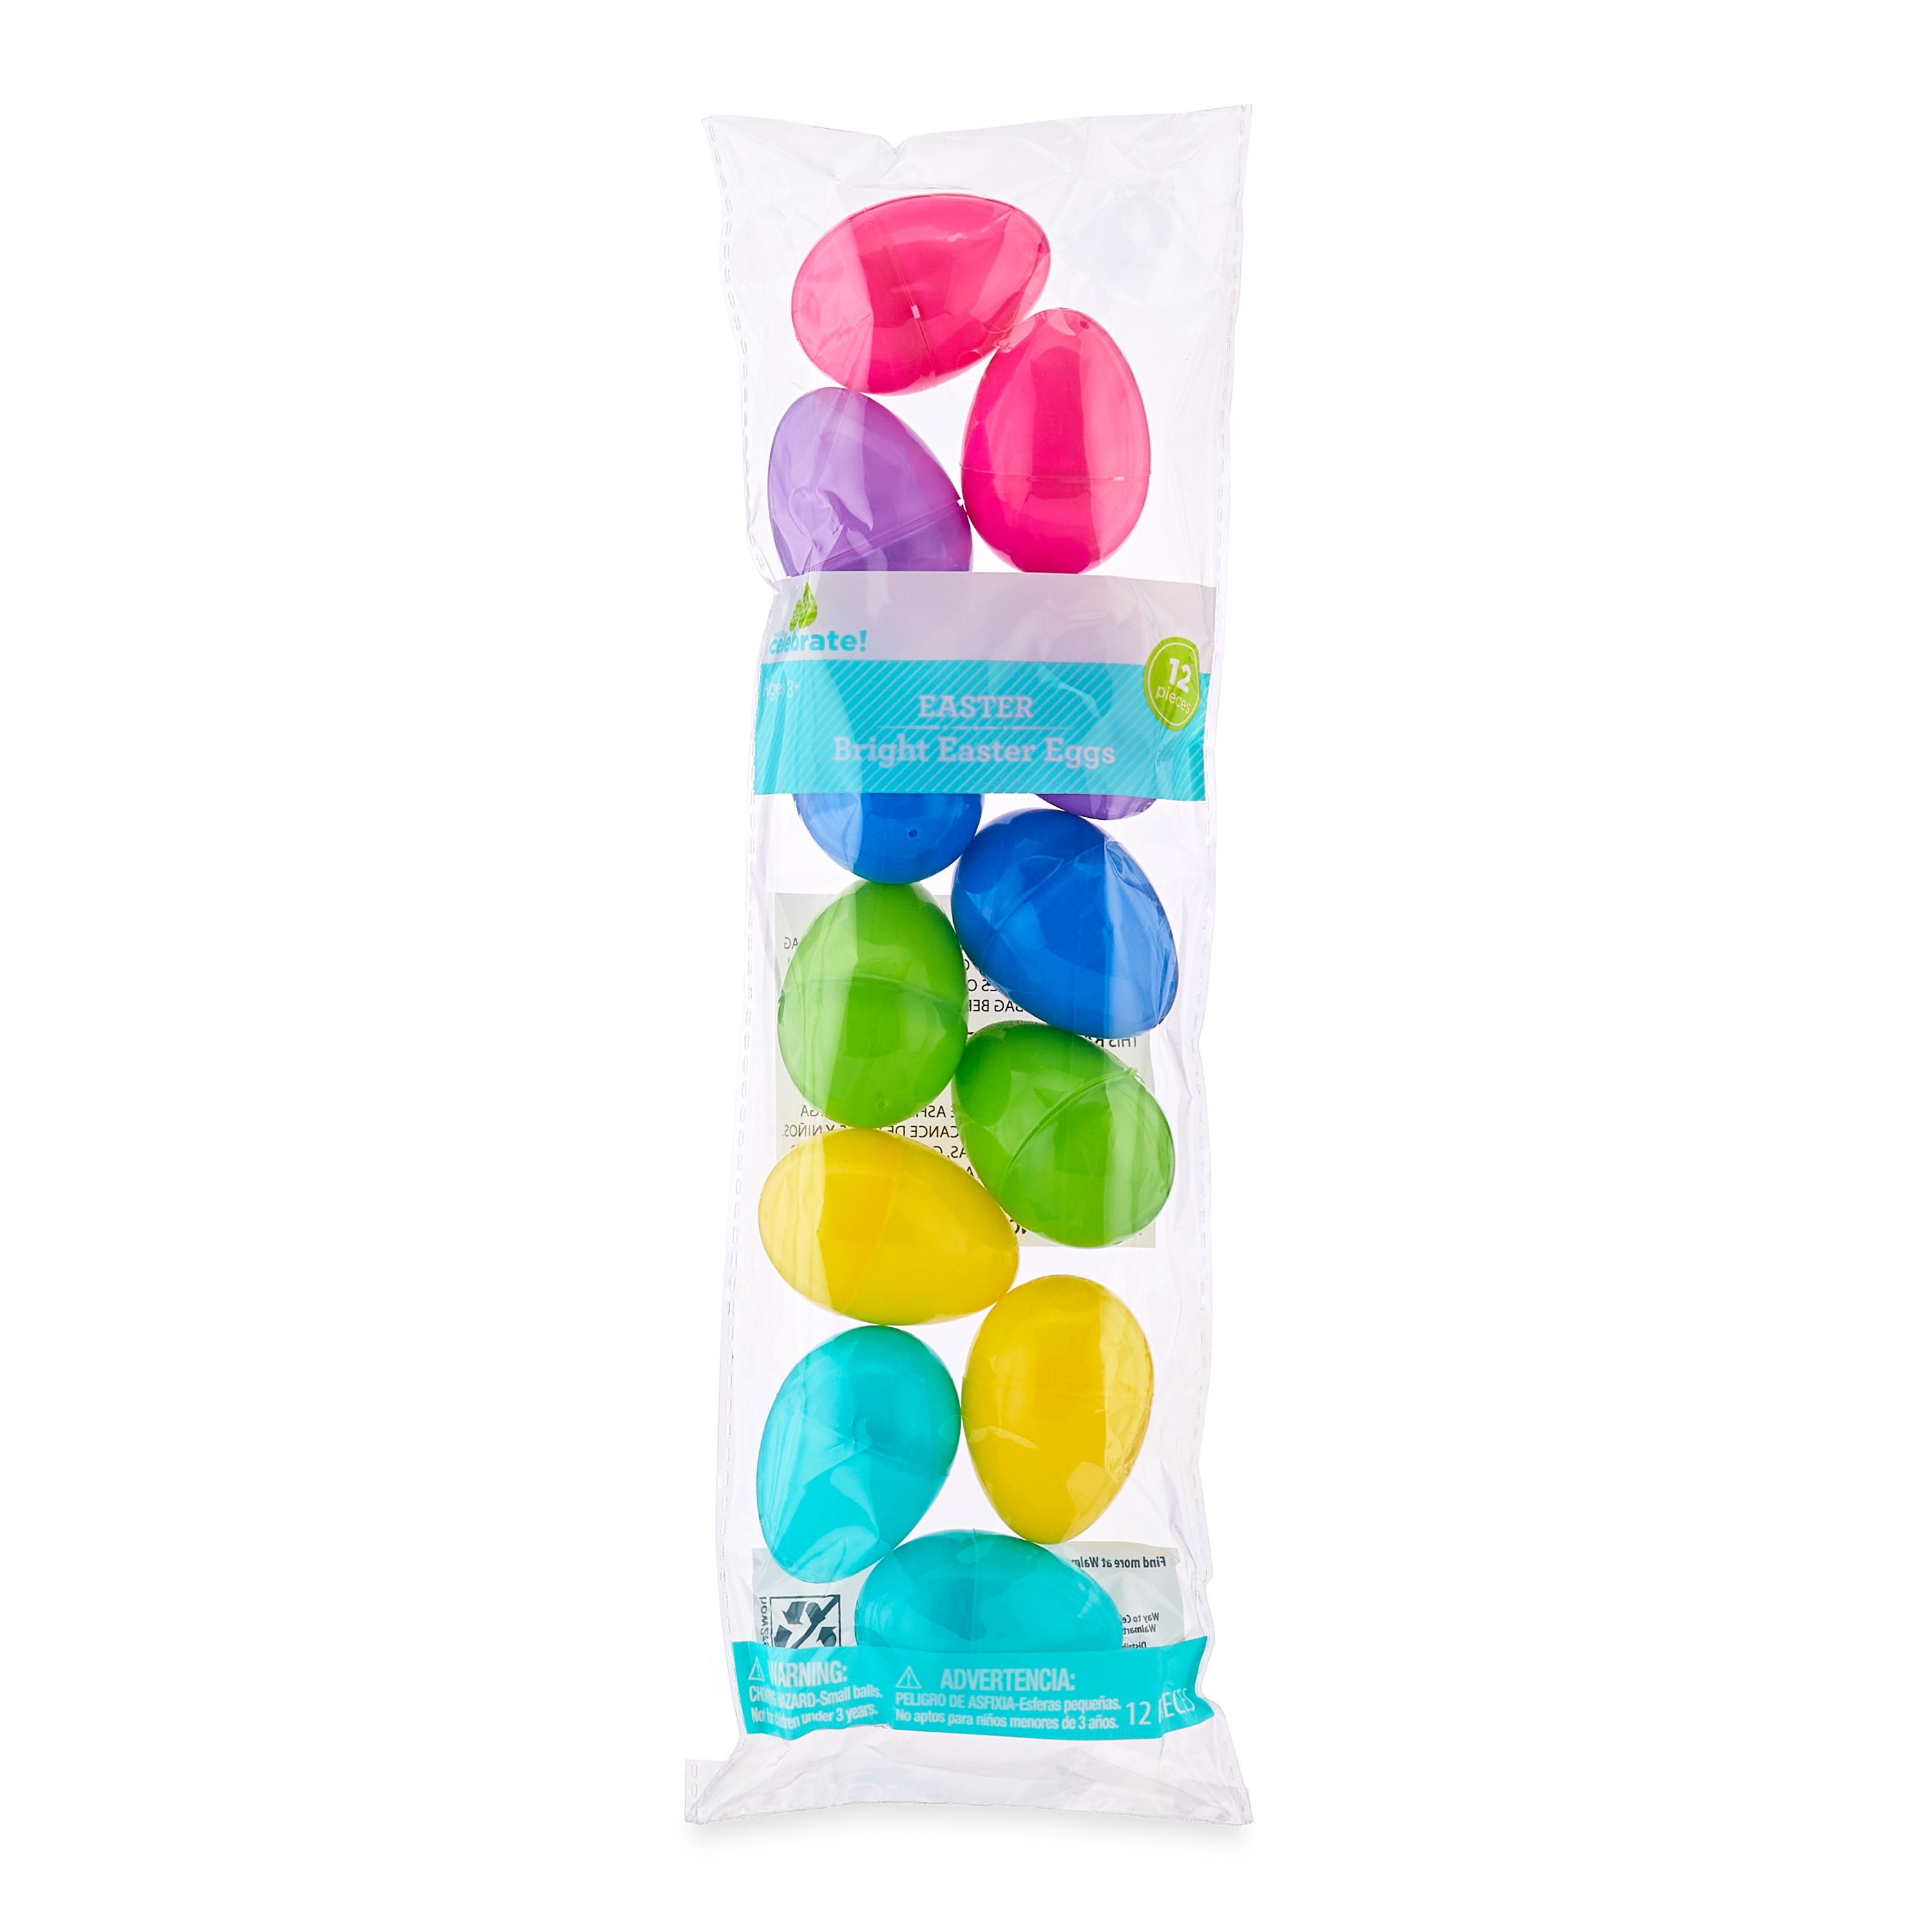 WAY TO CELEBRATE! Way To Celebrate Easter 40 MM Bright Plastic Easter Eggs, 12 Count